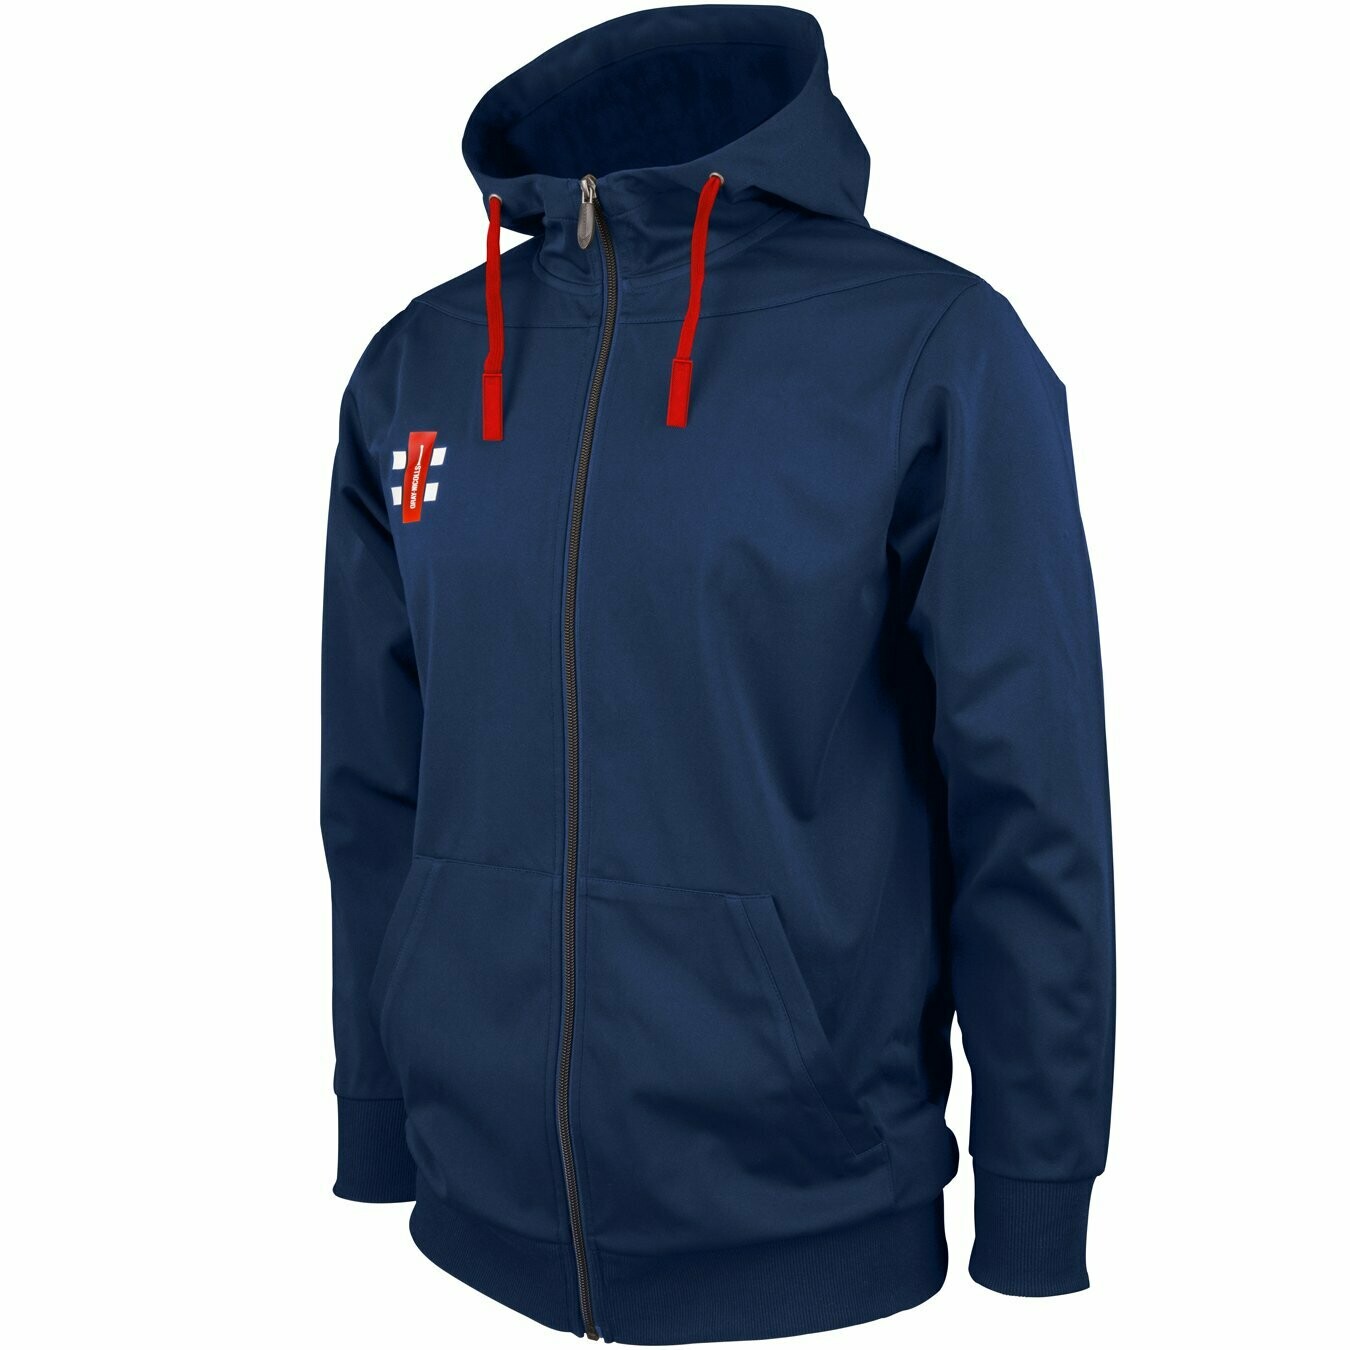 Stafford Place Pro Performance Full Zip Hooded Top